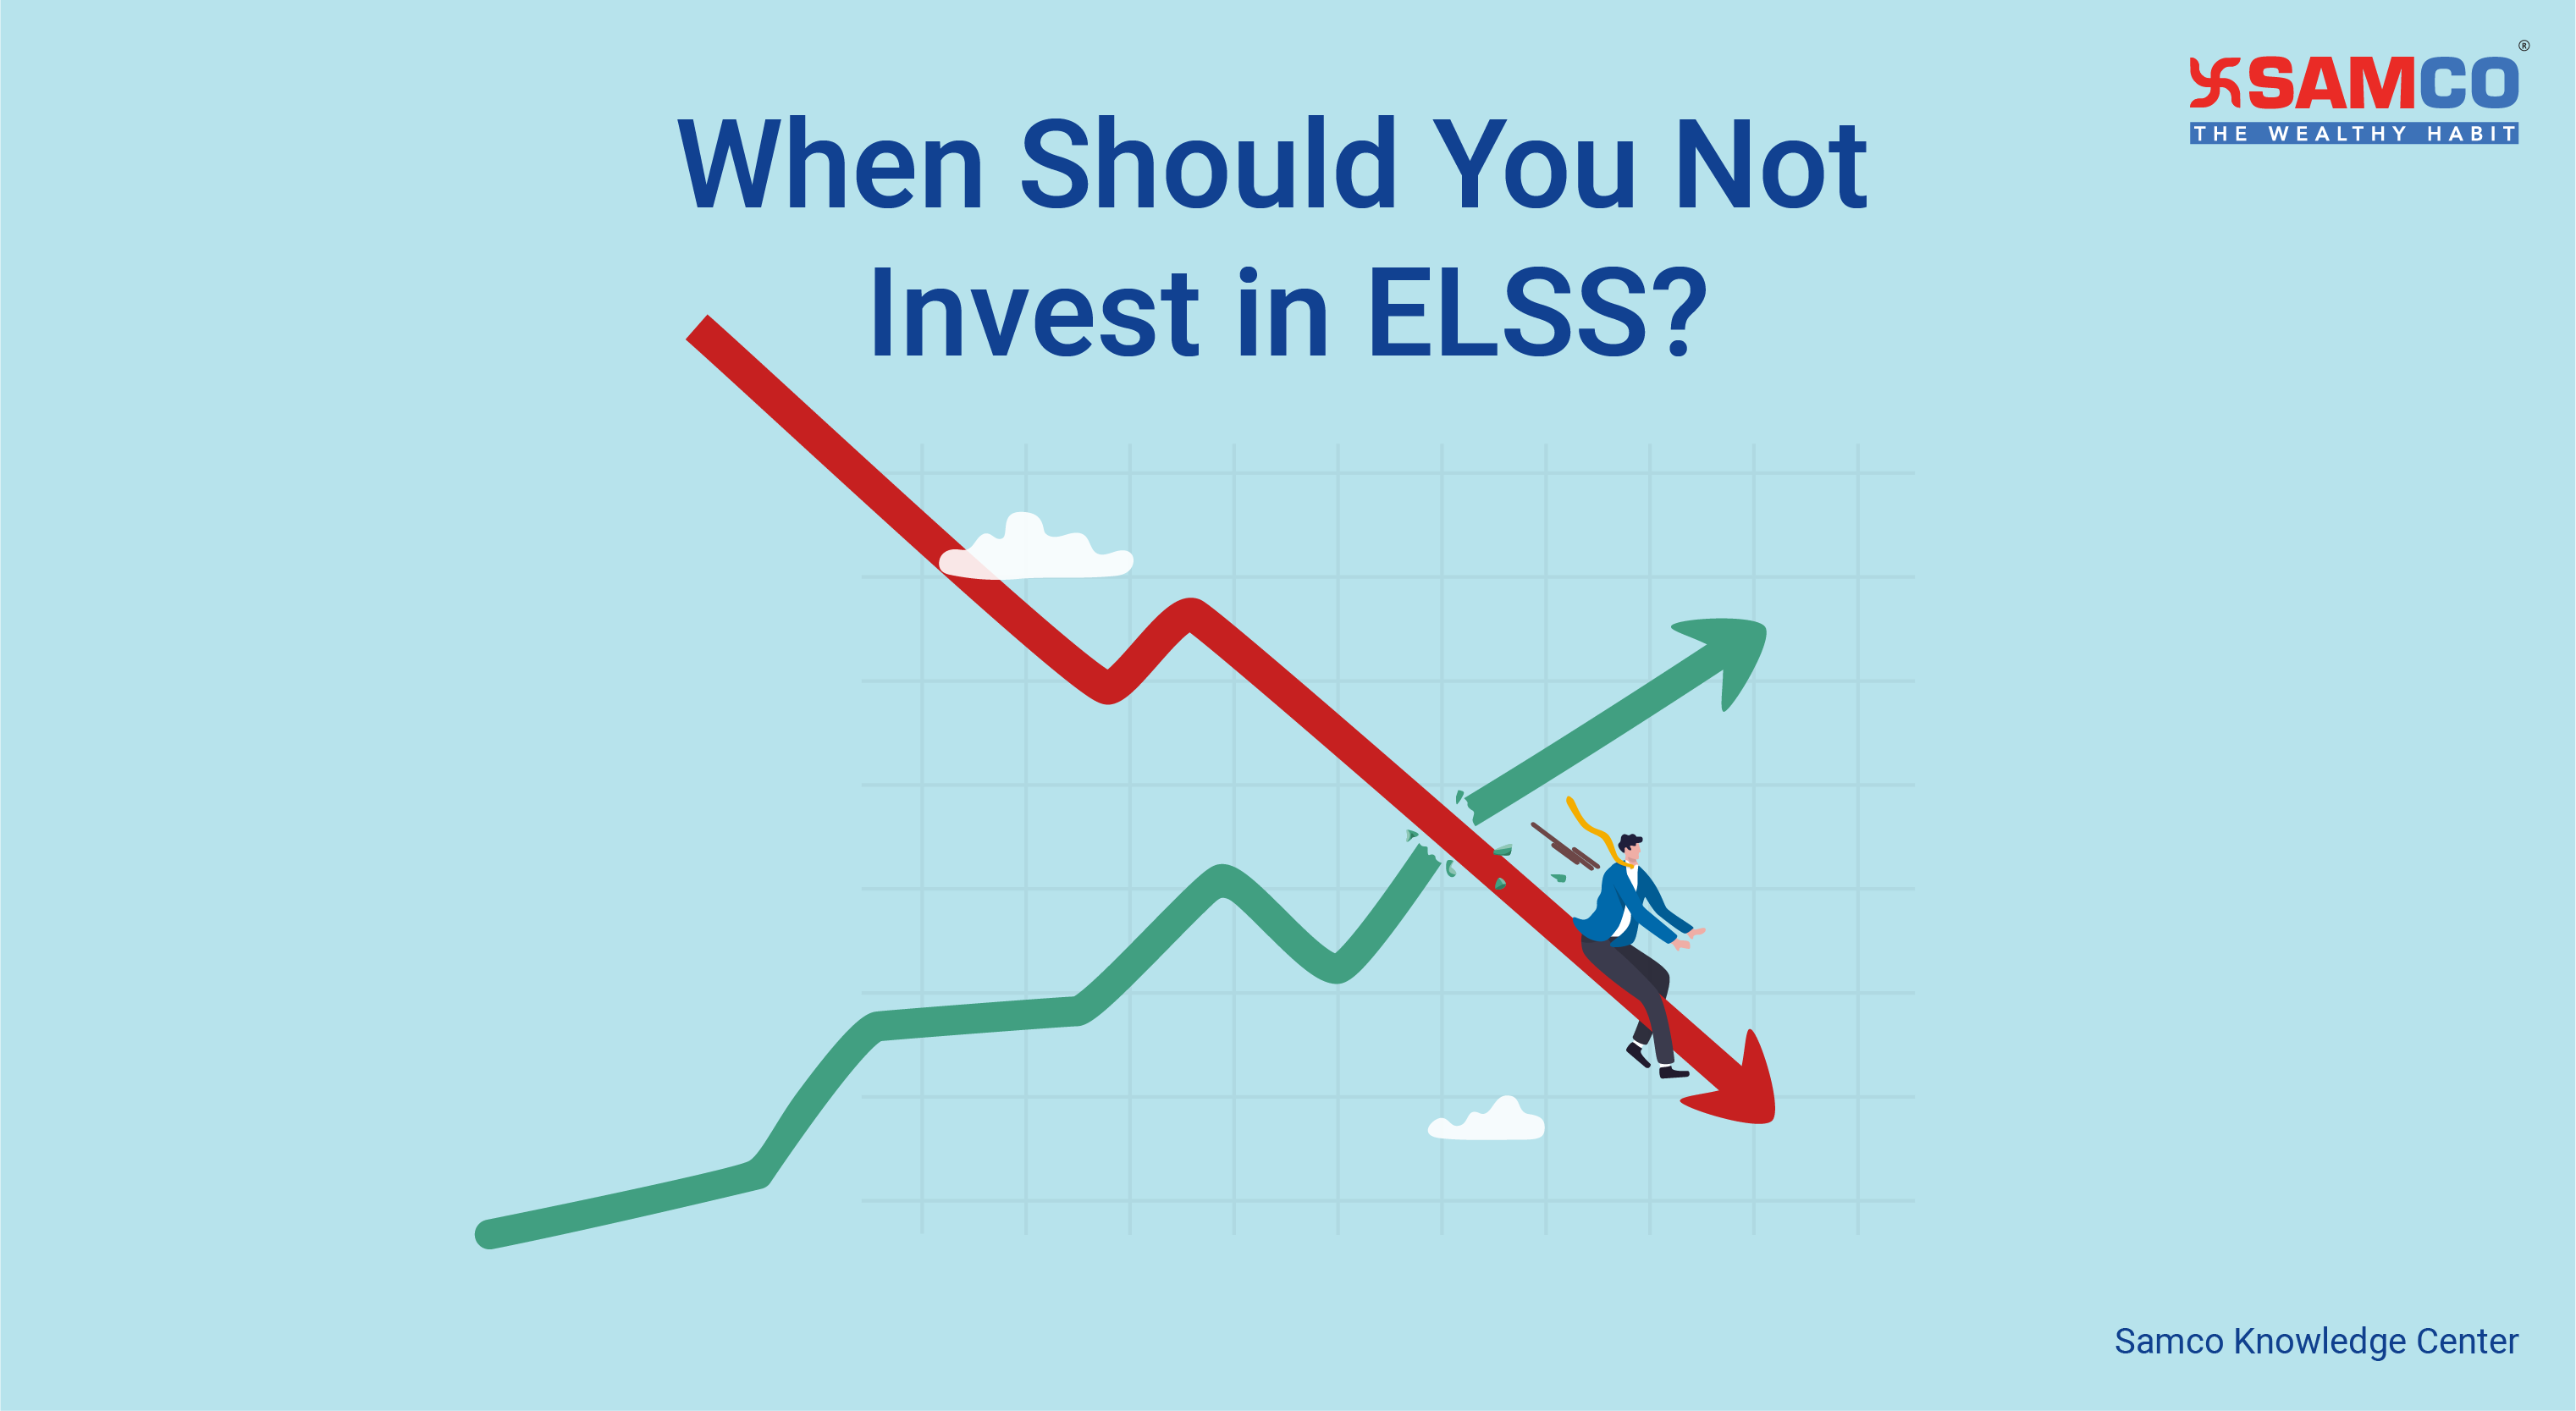 When Should You Not Invest in ELSS?